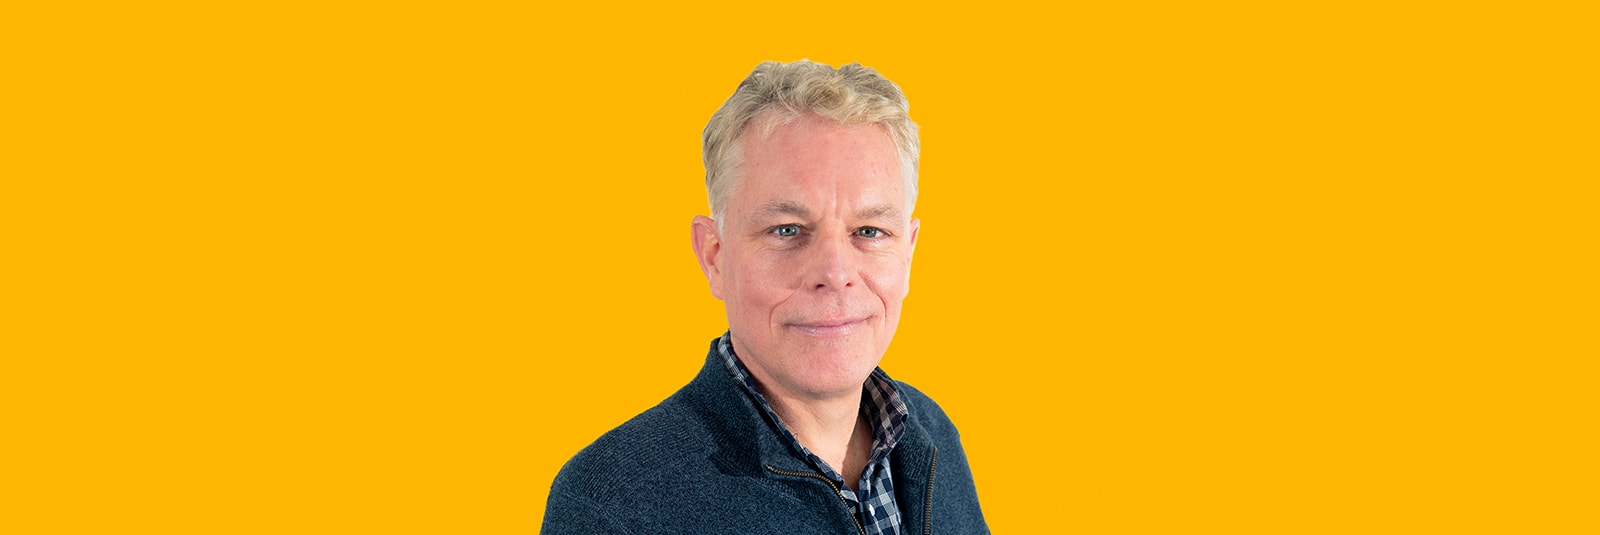 George Snell named Head of Content Innovation